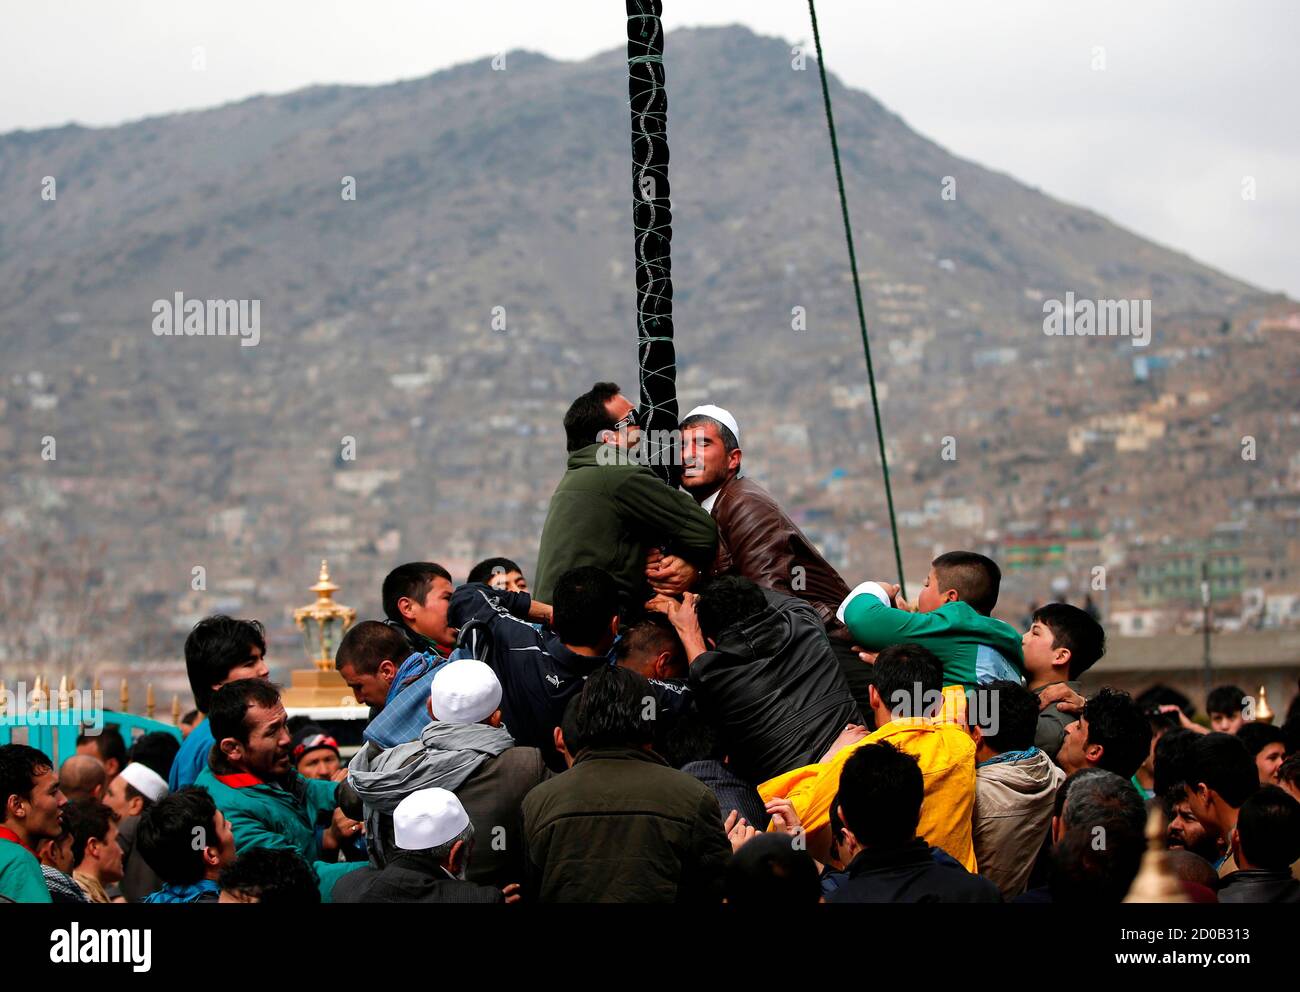 Afghans try to touch and kiss a religious flag to celebrate the Afghan New  Year (Newroz) in Kabul March 21, 2014. Afghanistan uses the Persian calendar  which runs from the vernal equinox.